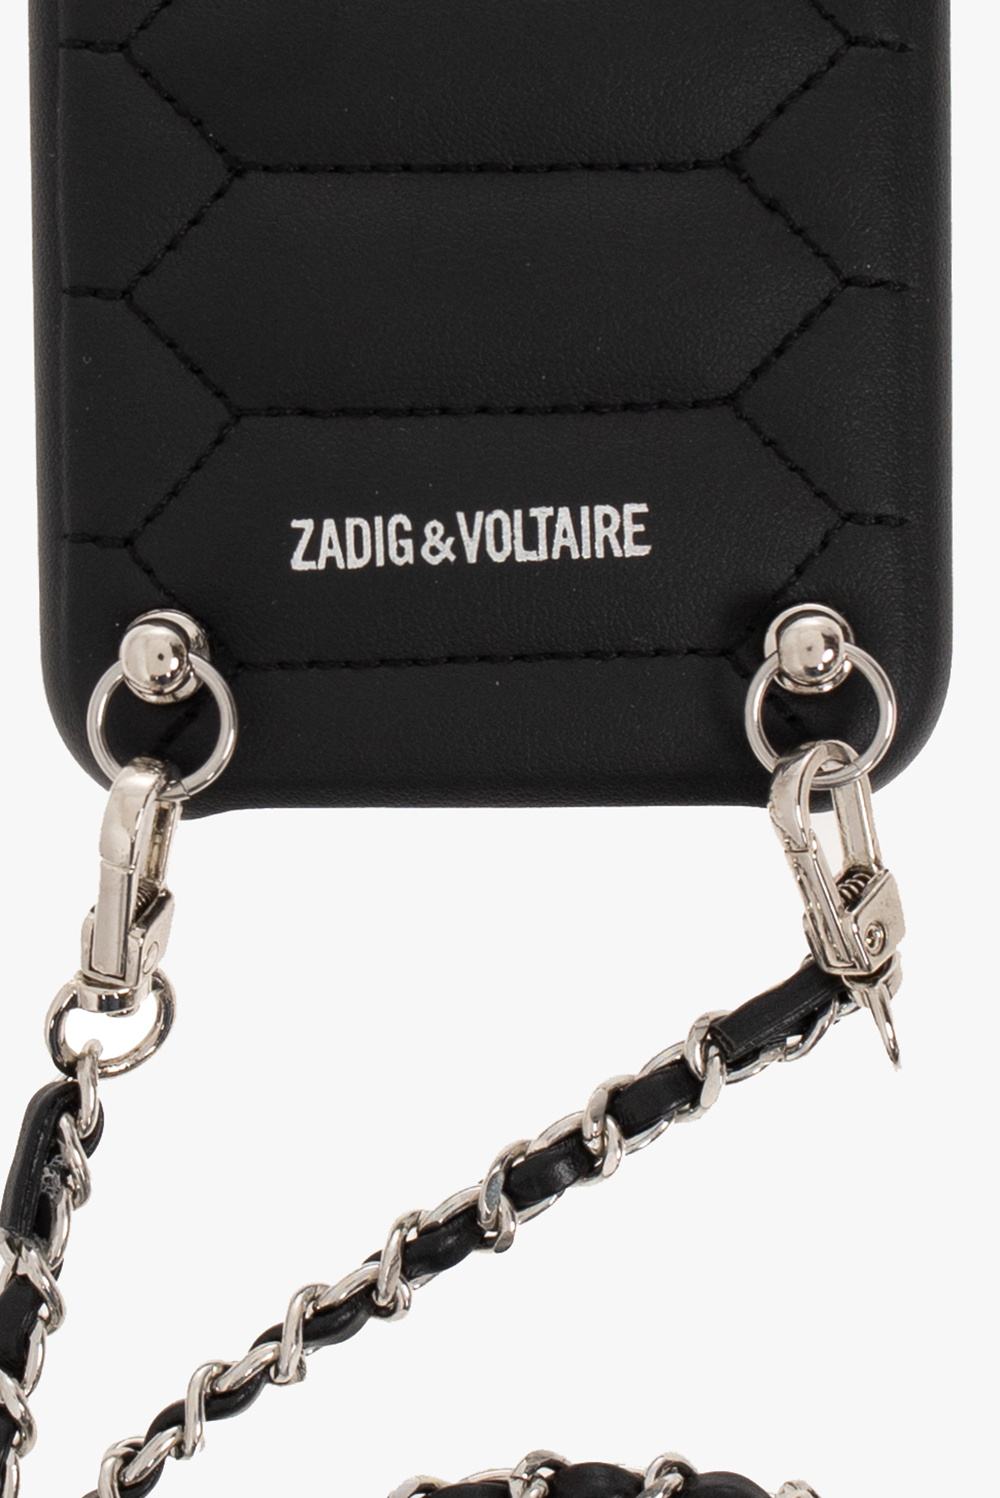 Zadig & Voltaire iPhone 11 case on chain